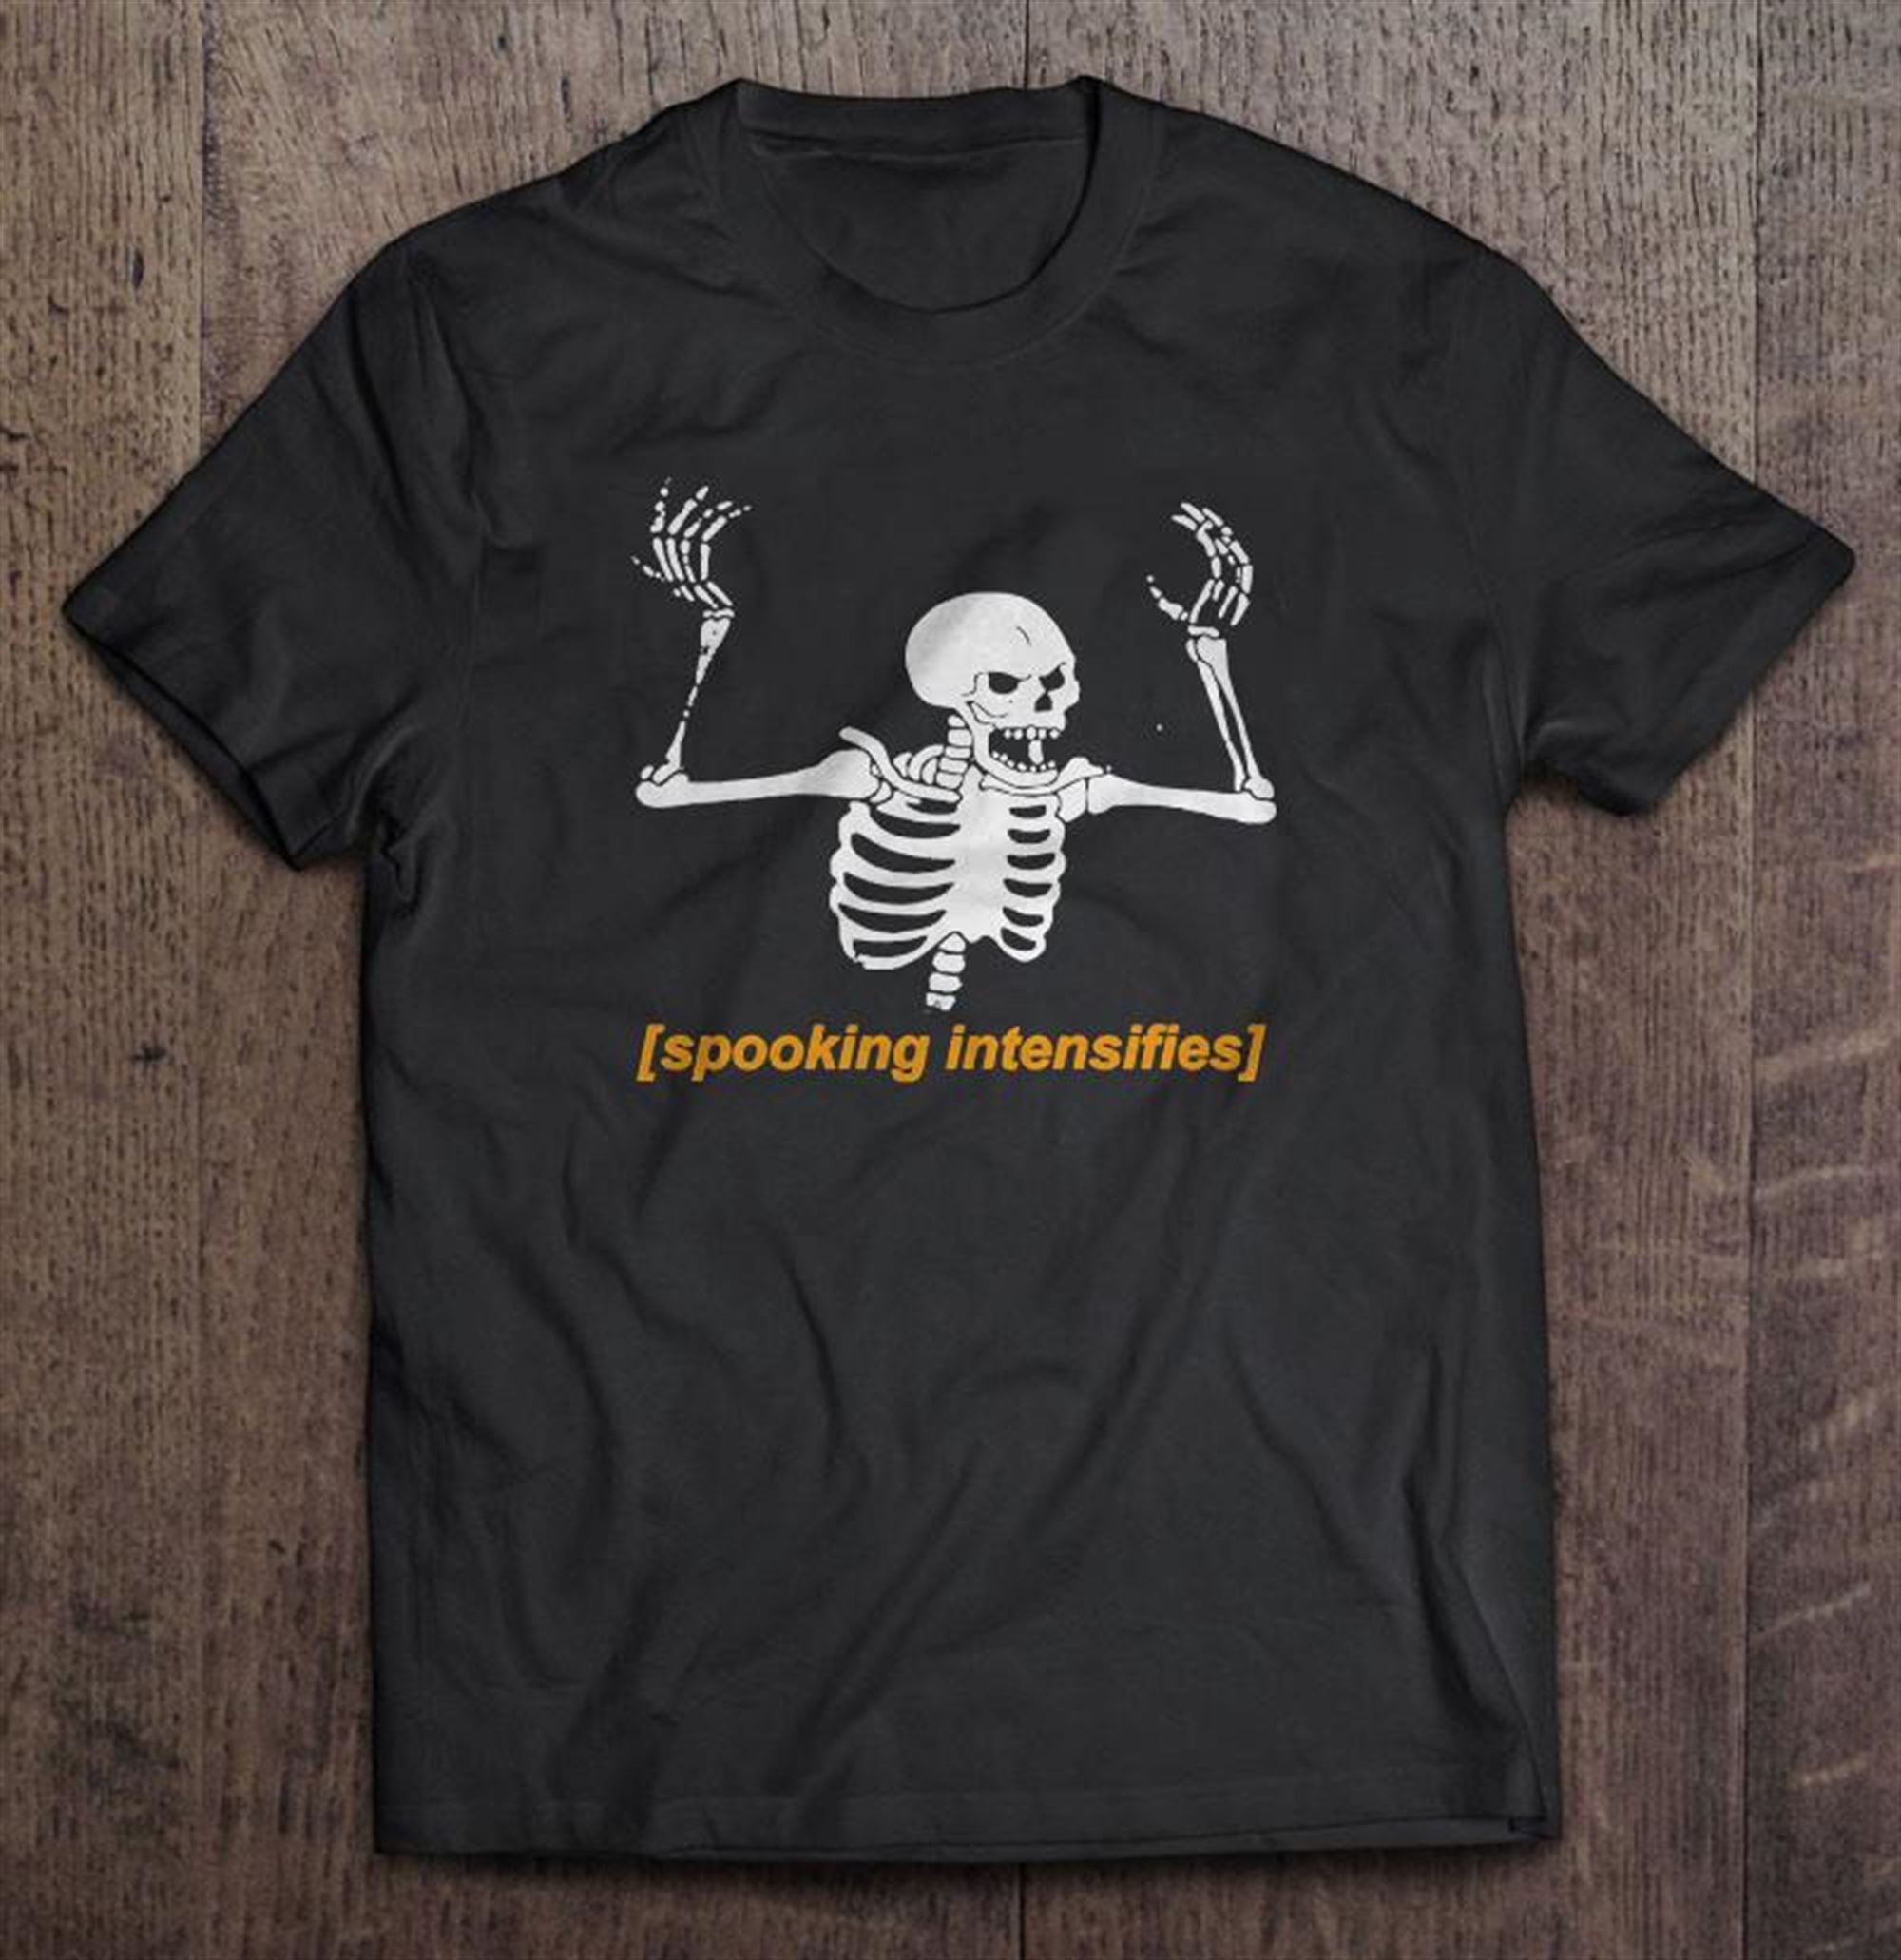 Spooking Intensifies Spooky Scary Skeleton Meme T-shirt Size Up To 5xl